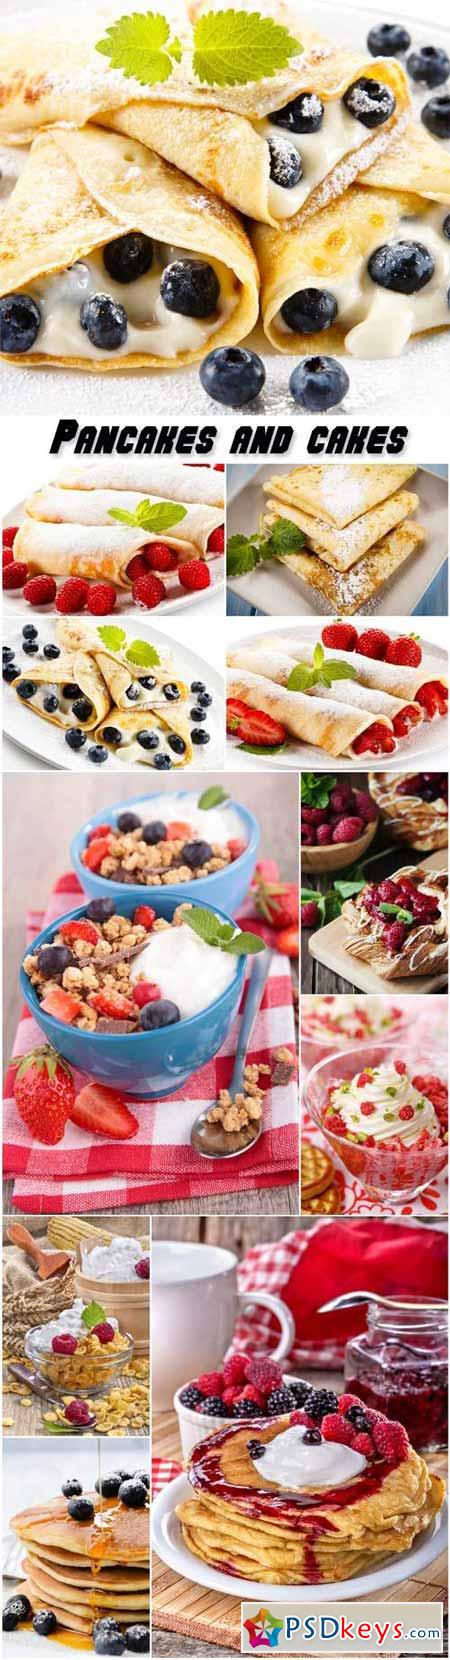 Pancakes with berries and cakes